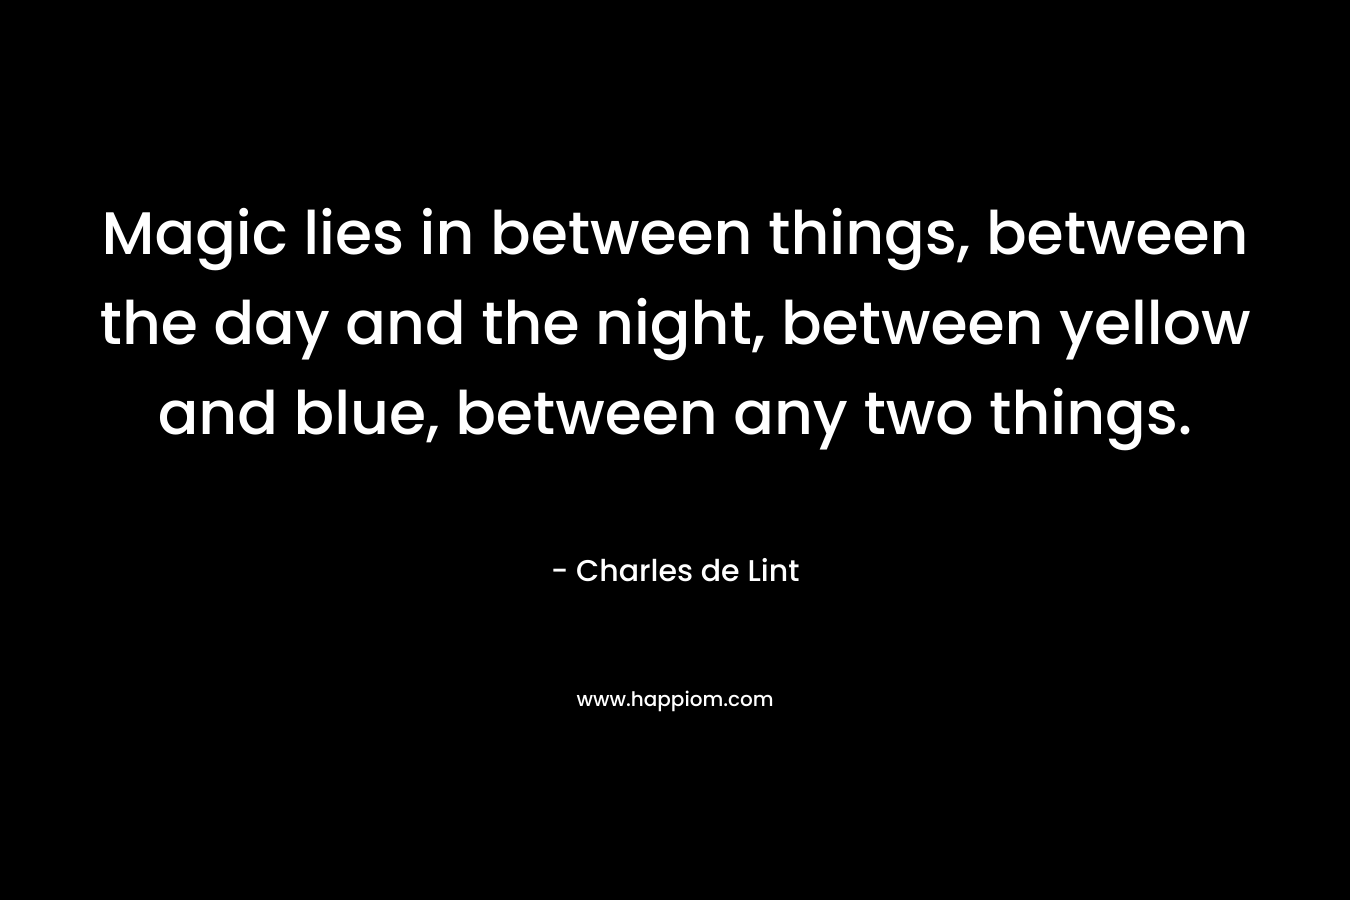 Magic lies in between things, between the day and the night, between yellow and blue, between any two things. – Charles de Lint